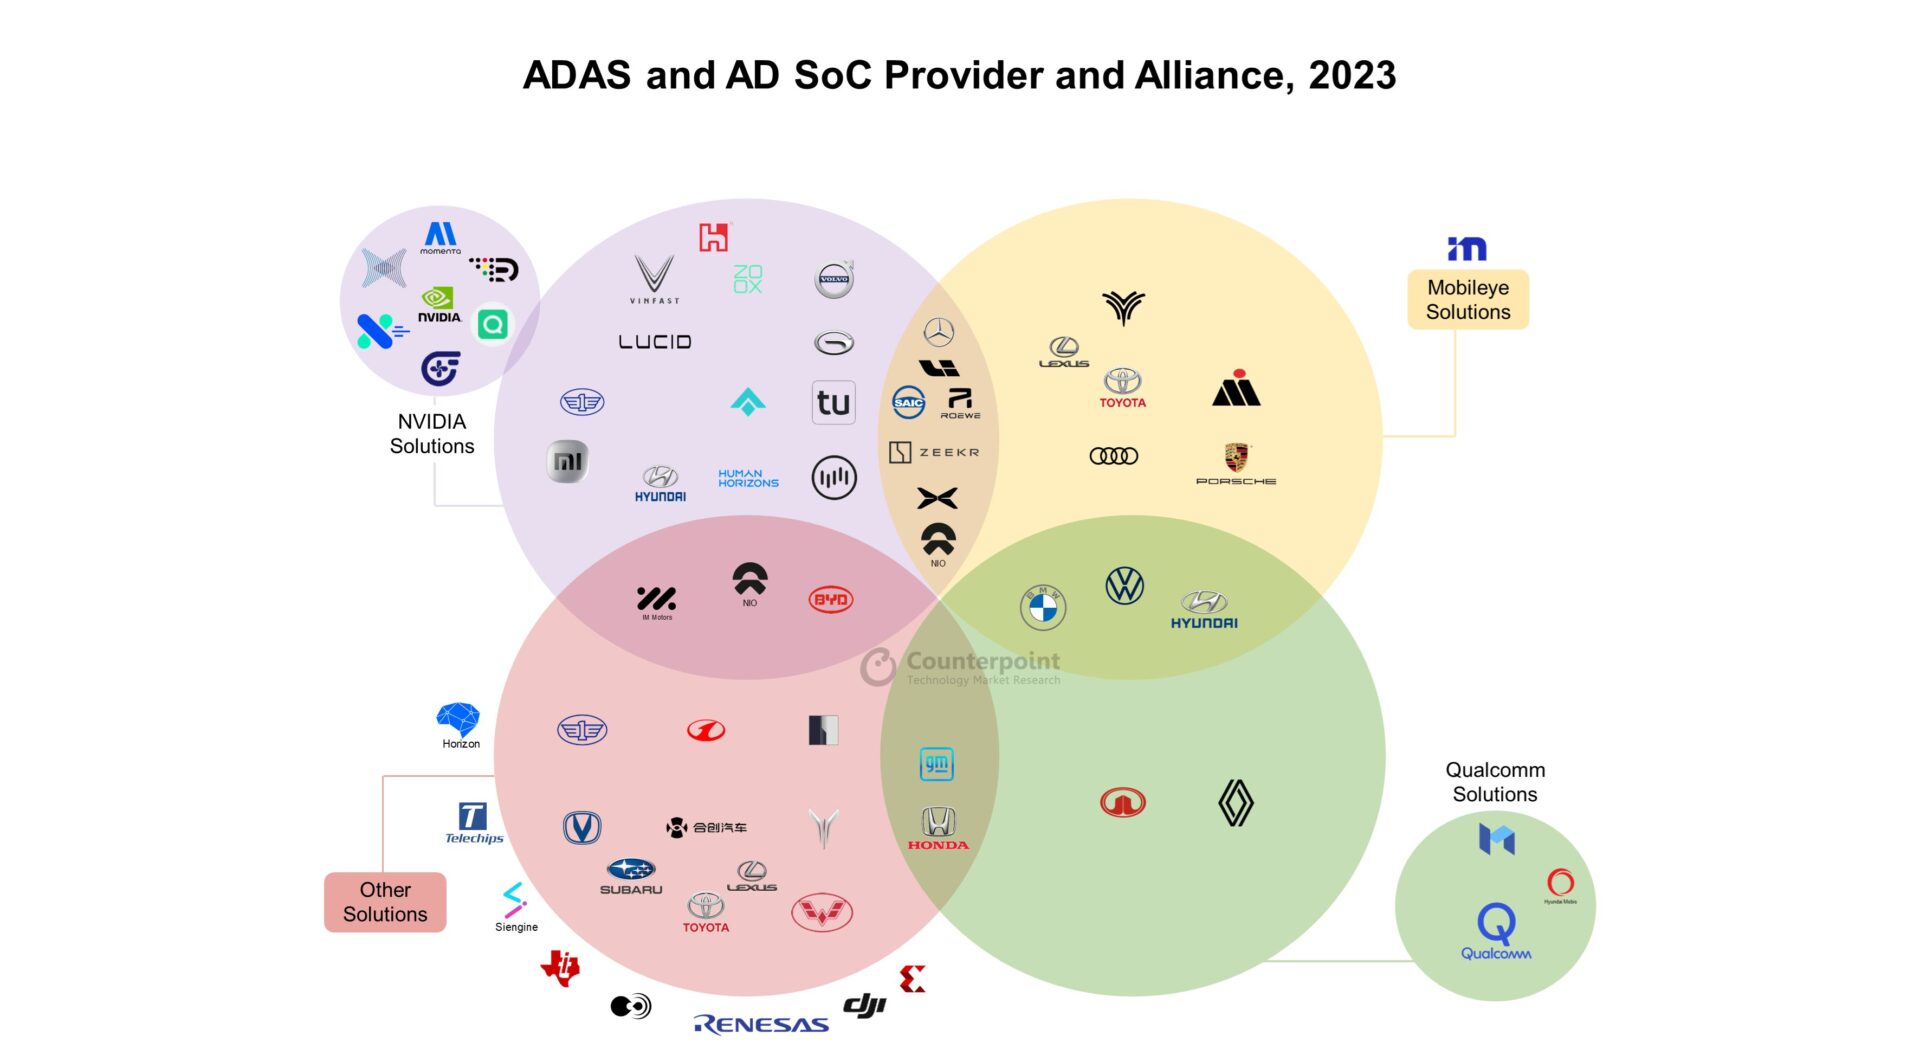 ADAS and AD SoC Provider and Alliance, 2023